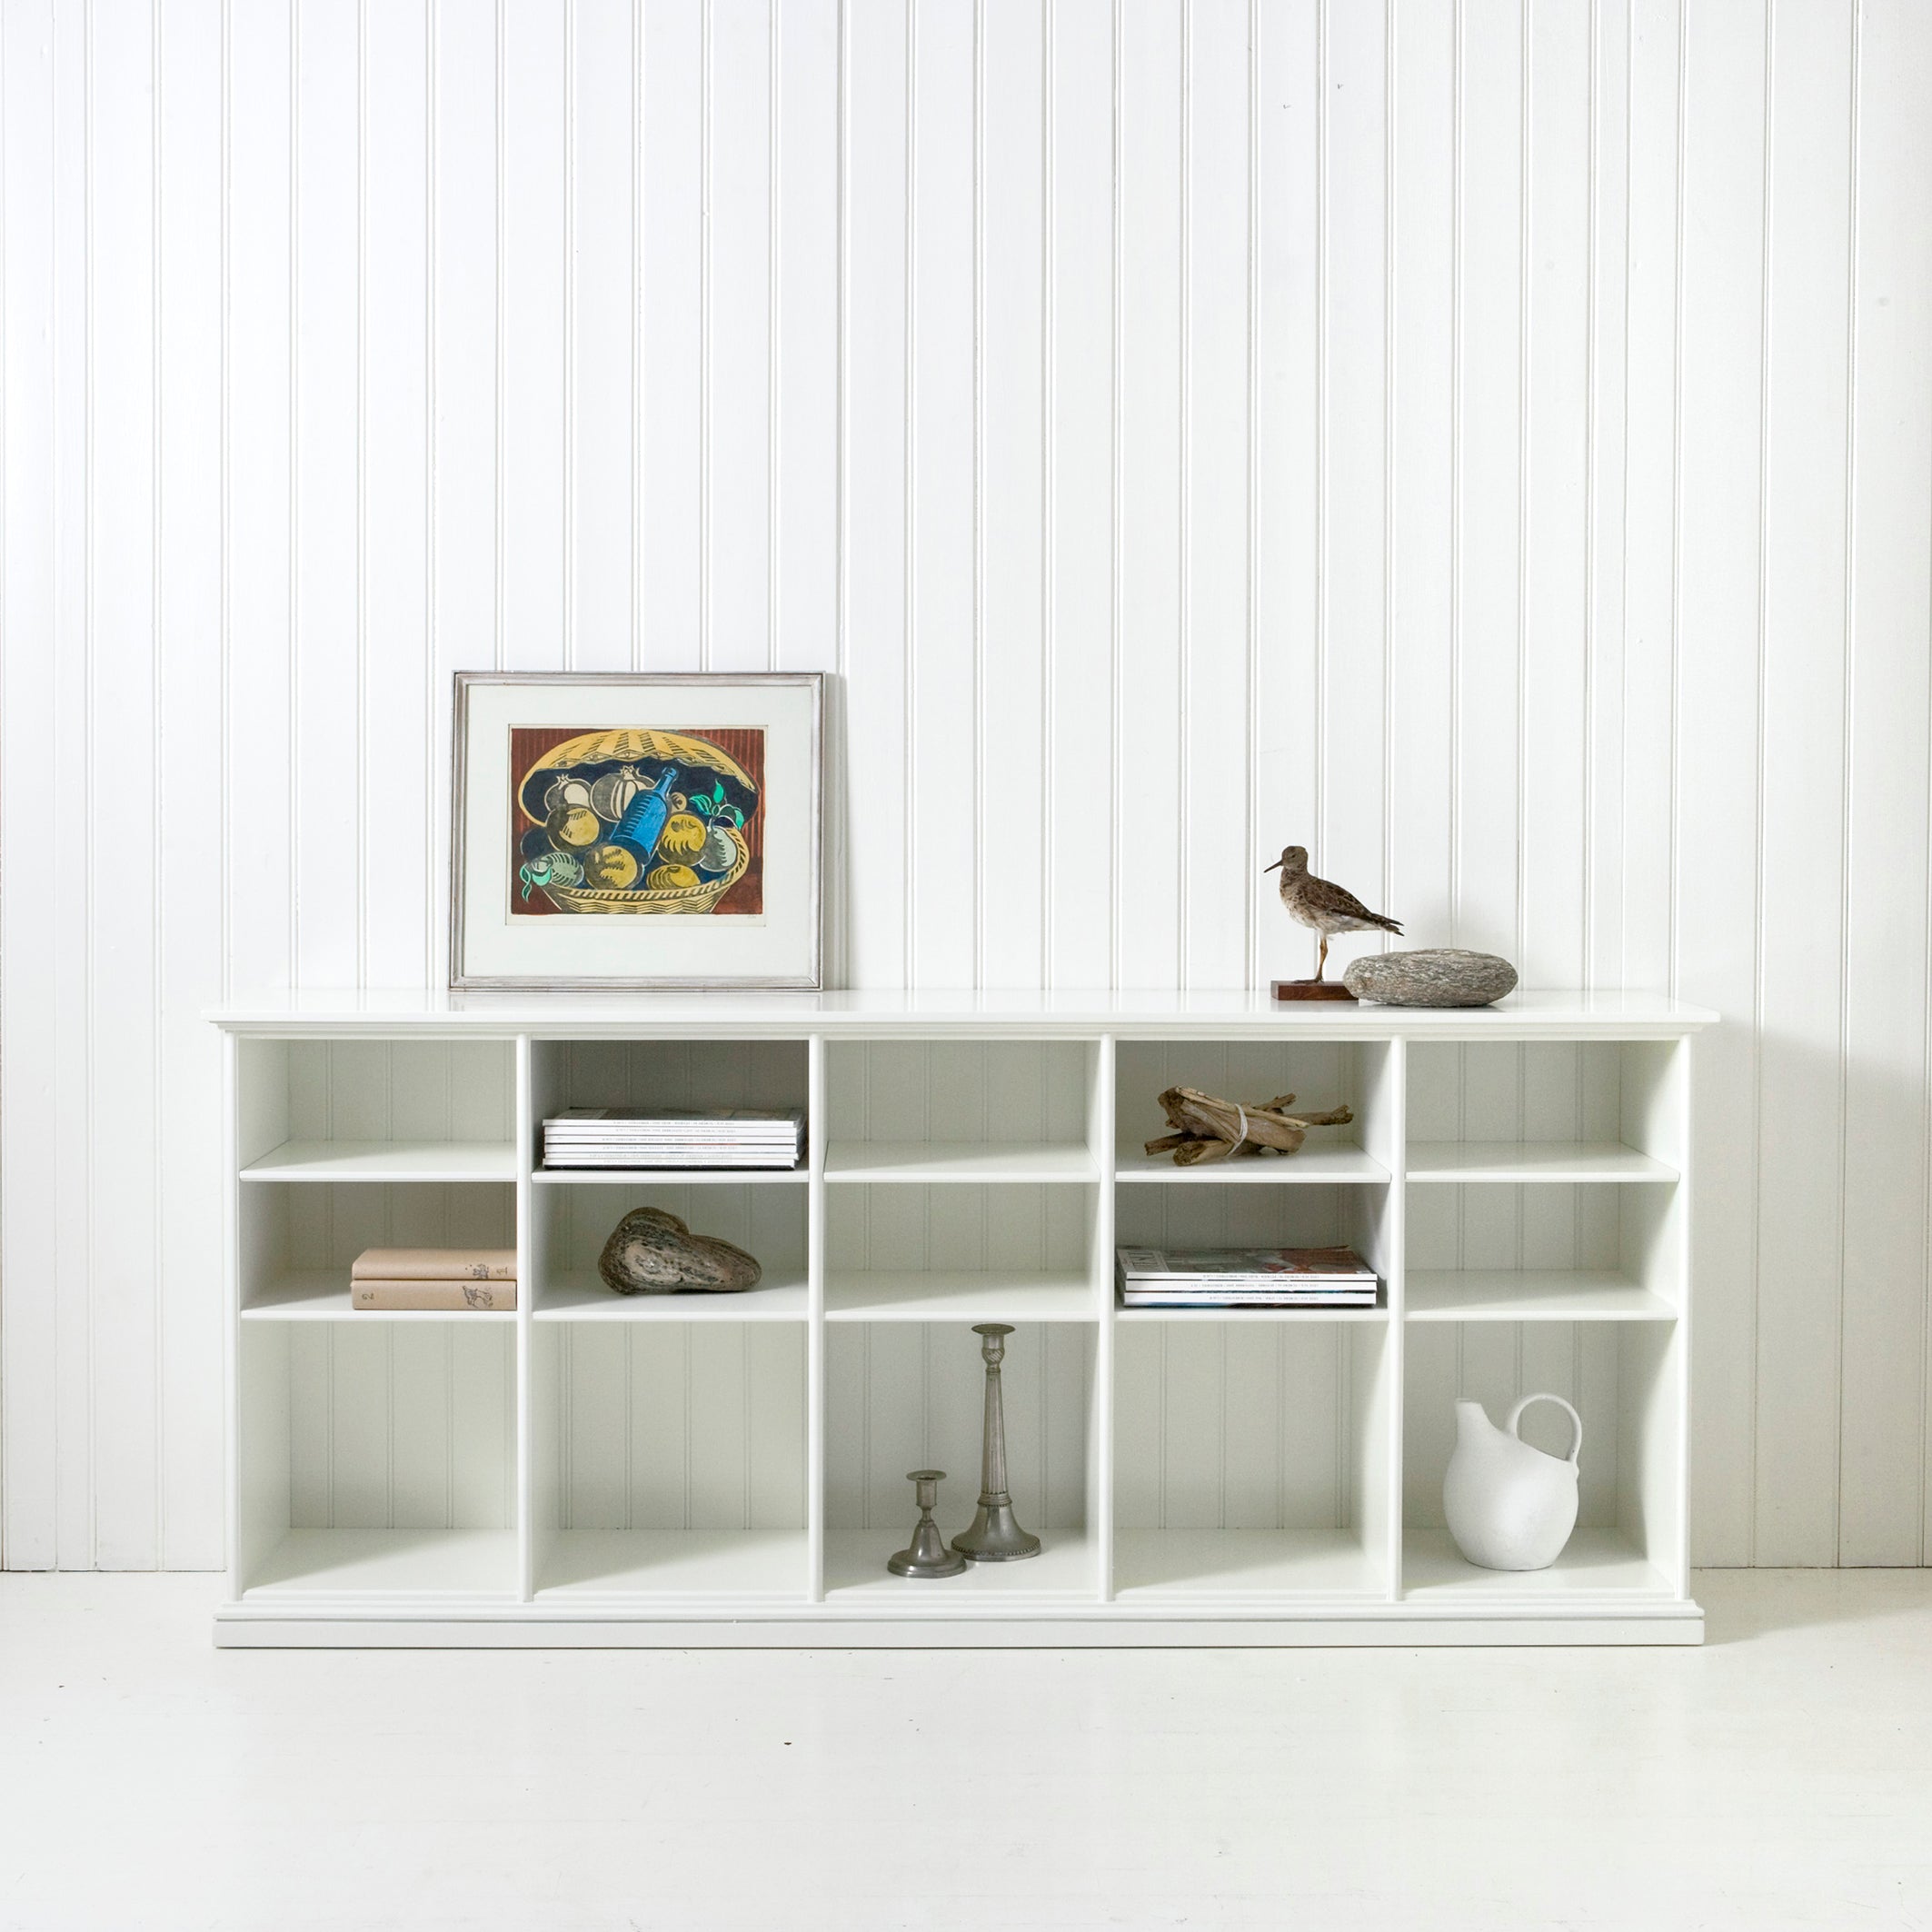 Oliver Furniture Seaside flat shelf with ten compartments, white